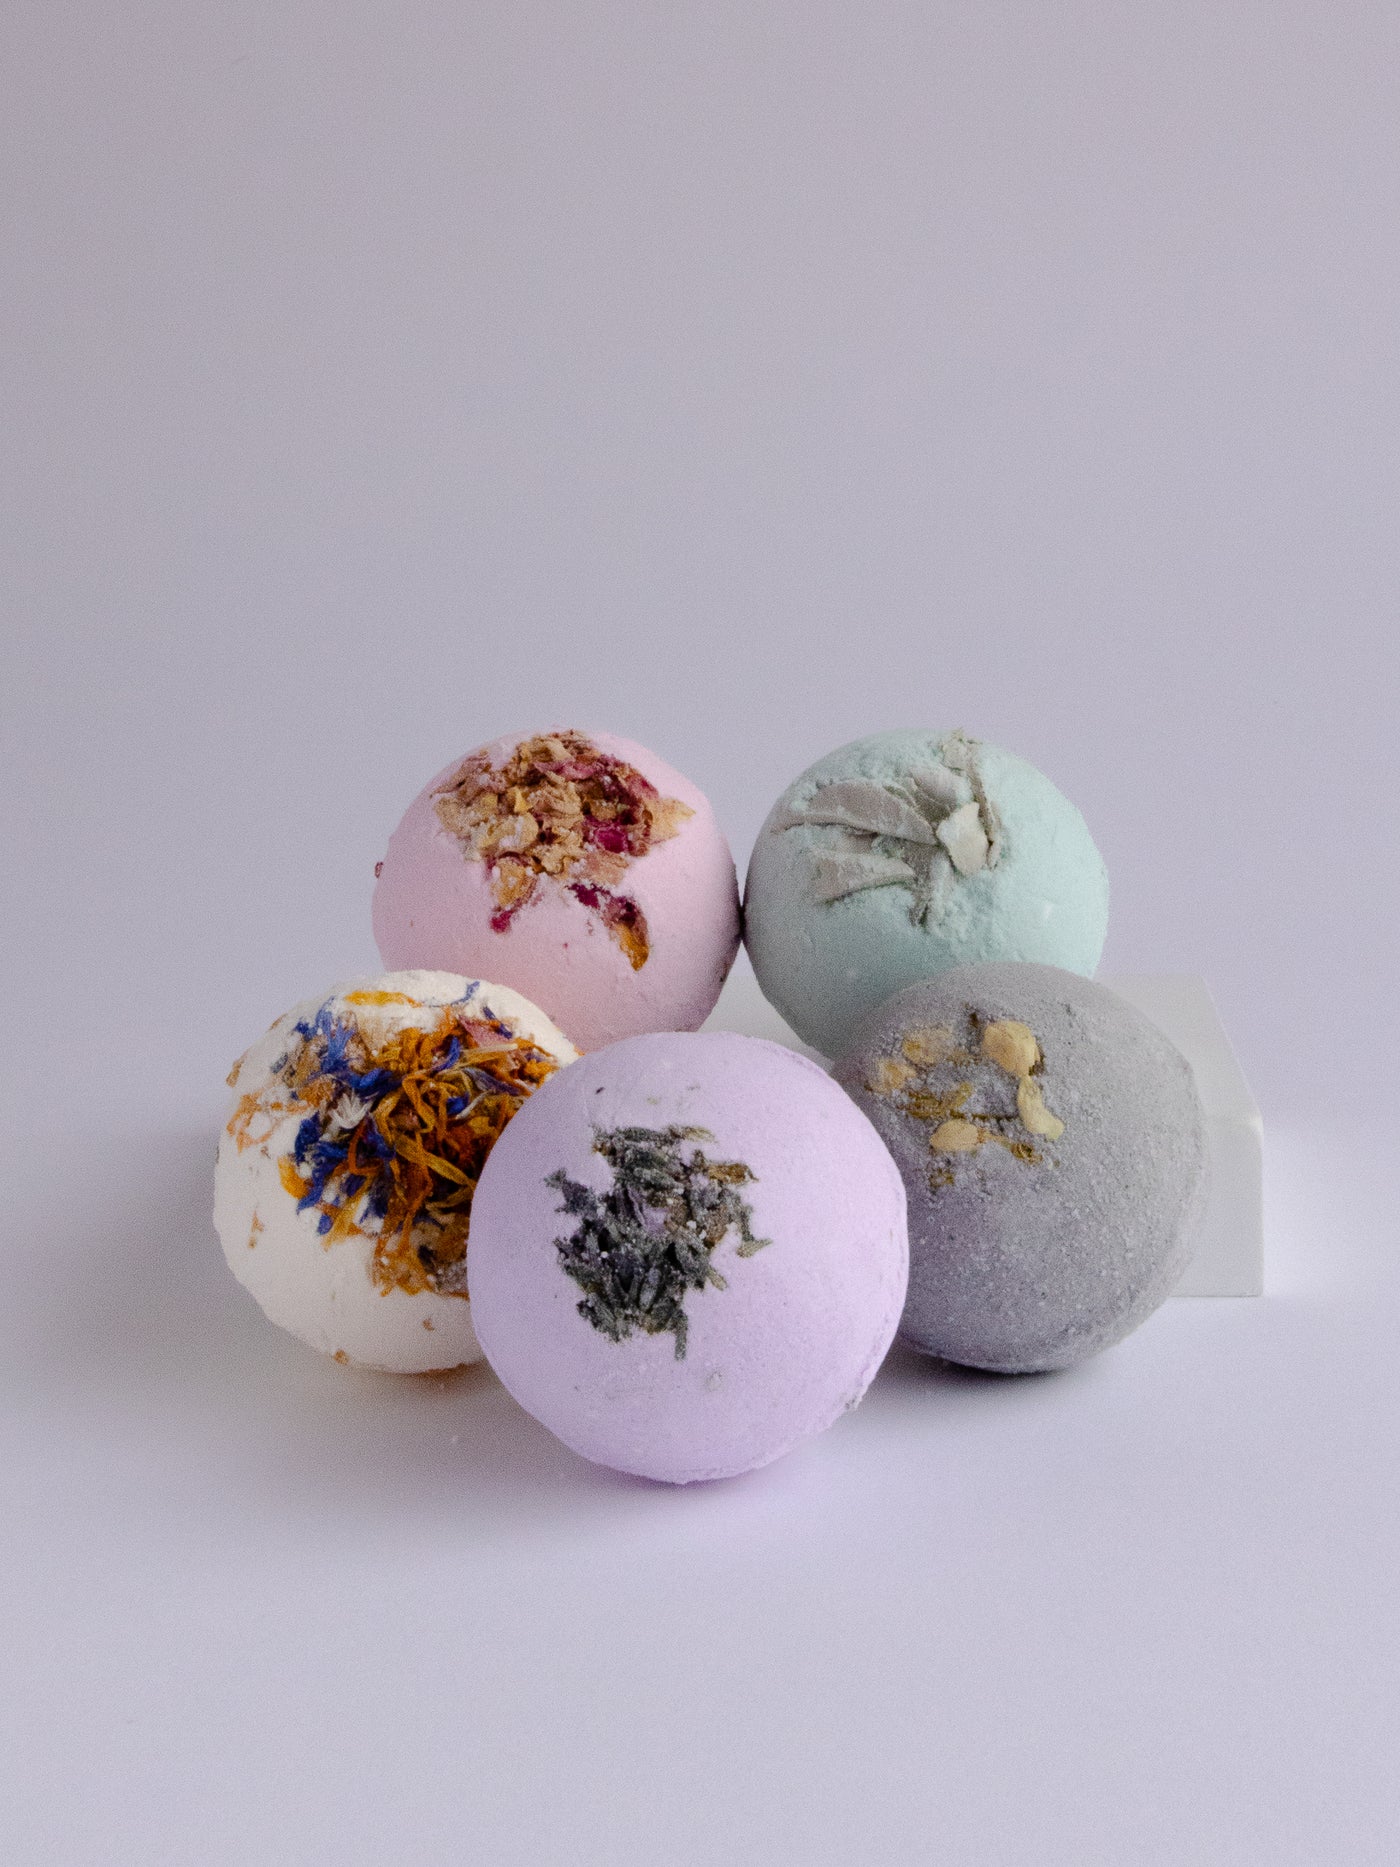 The Lavender Love Bomb is made with coconut oil, dried lavender and lavender essential oil. This bomb will leave you feeling relaxed and stress-free! Handmade in Ojai, CA.